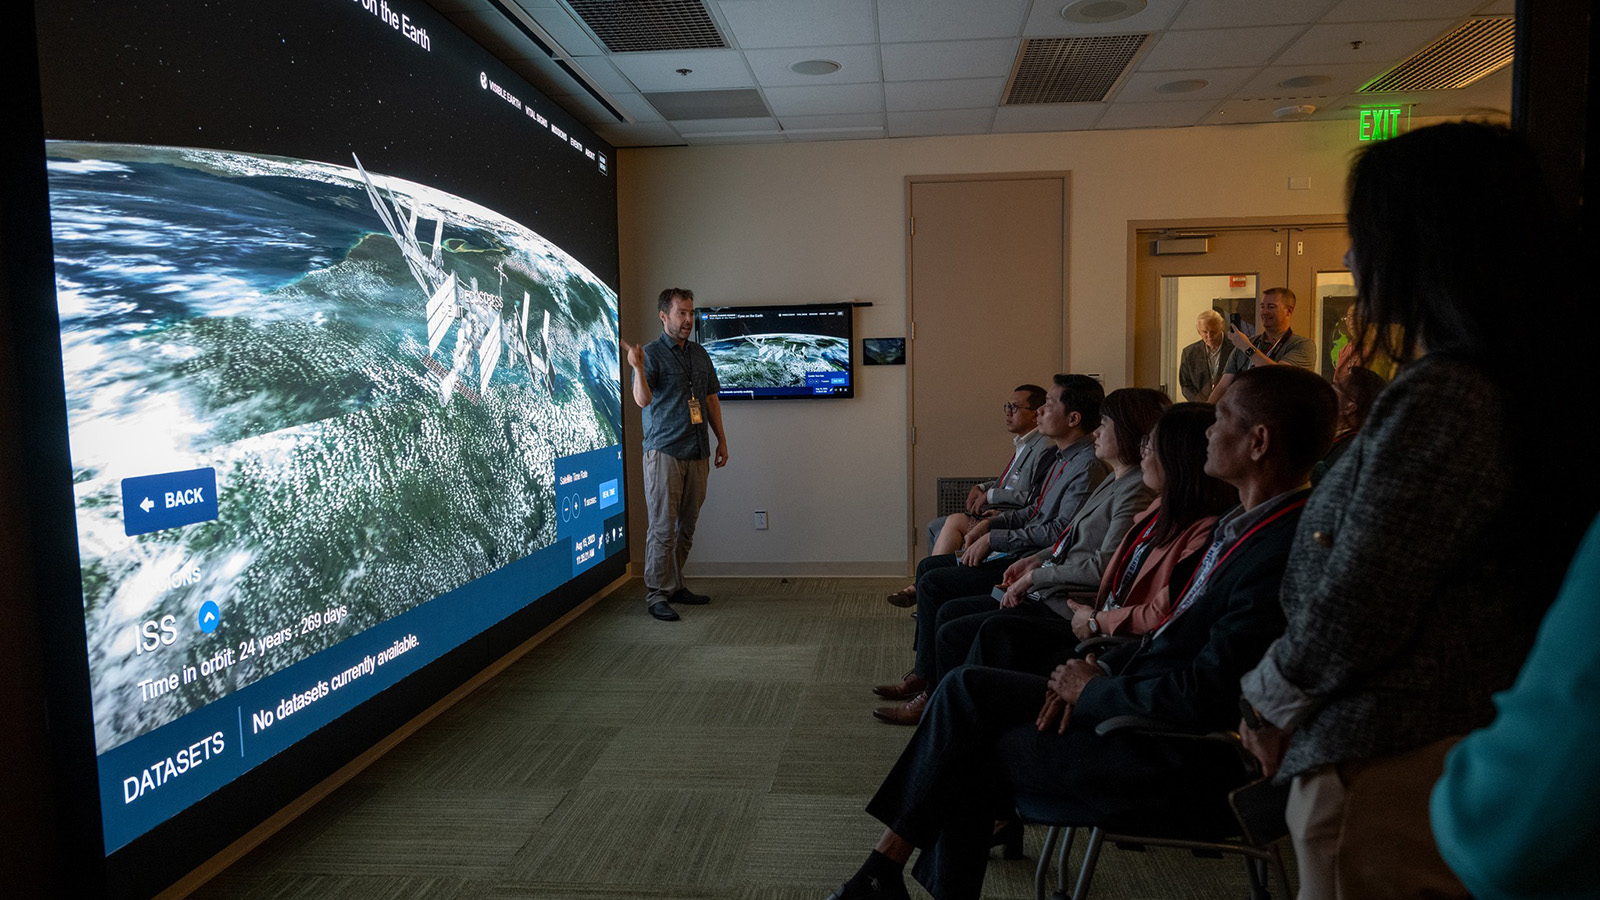 A man standing in front of an audience points to a large screen showing a simulated view of the ISS orbiting Earth.